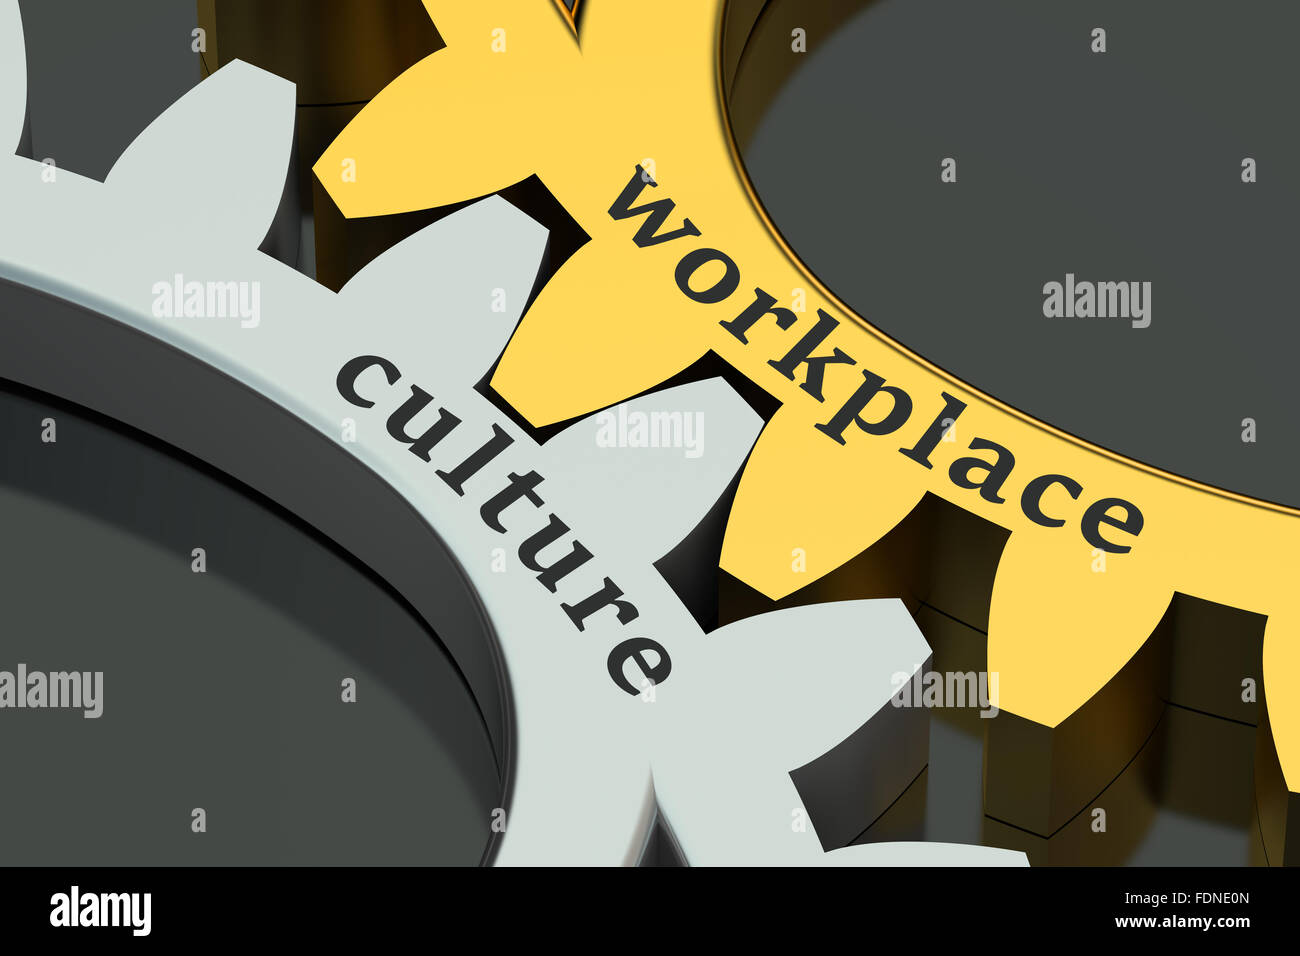 Workplace Culture concept on the gearwheels Stock Photo